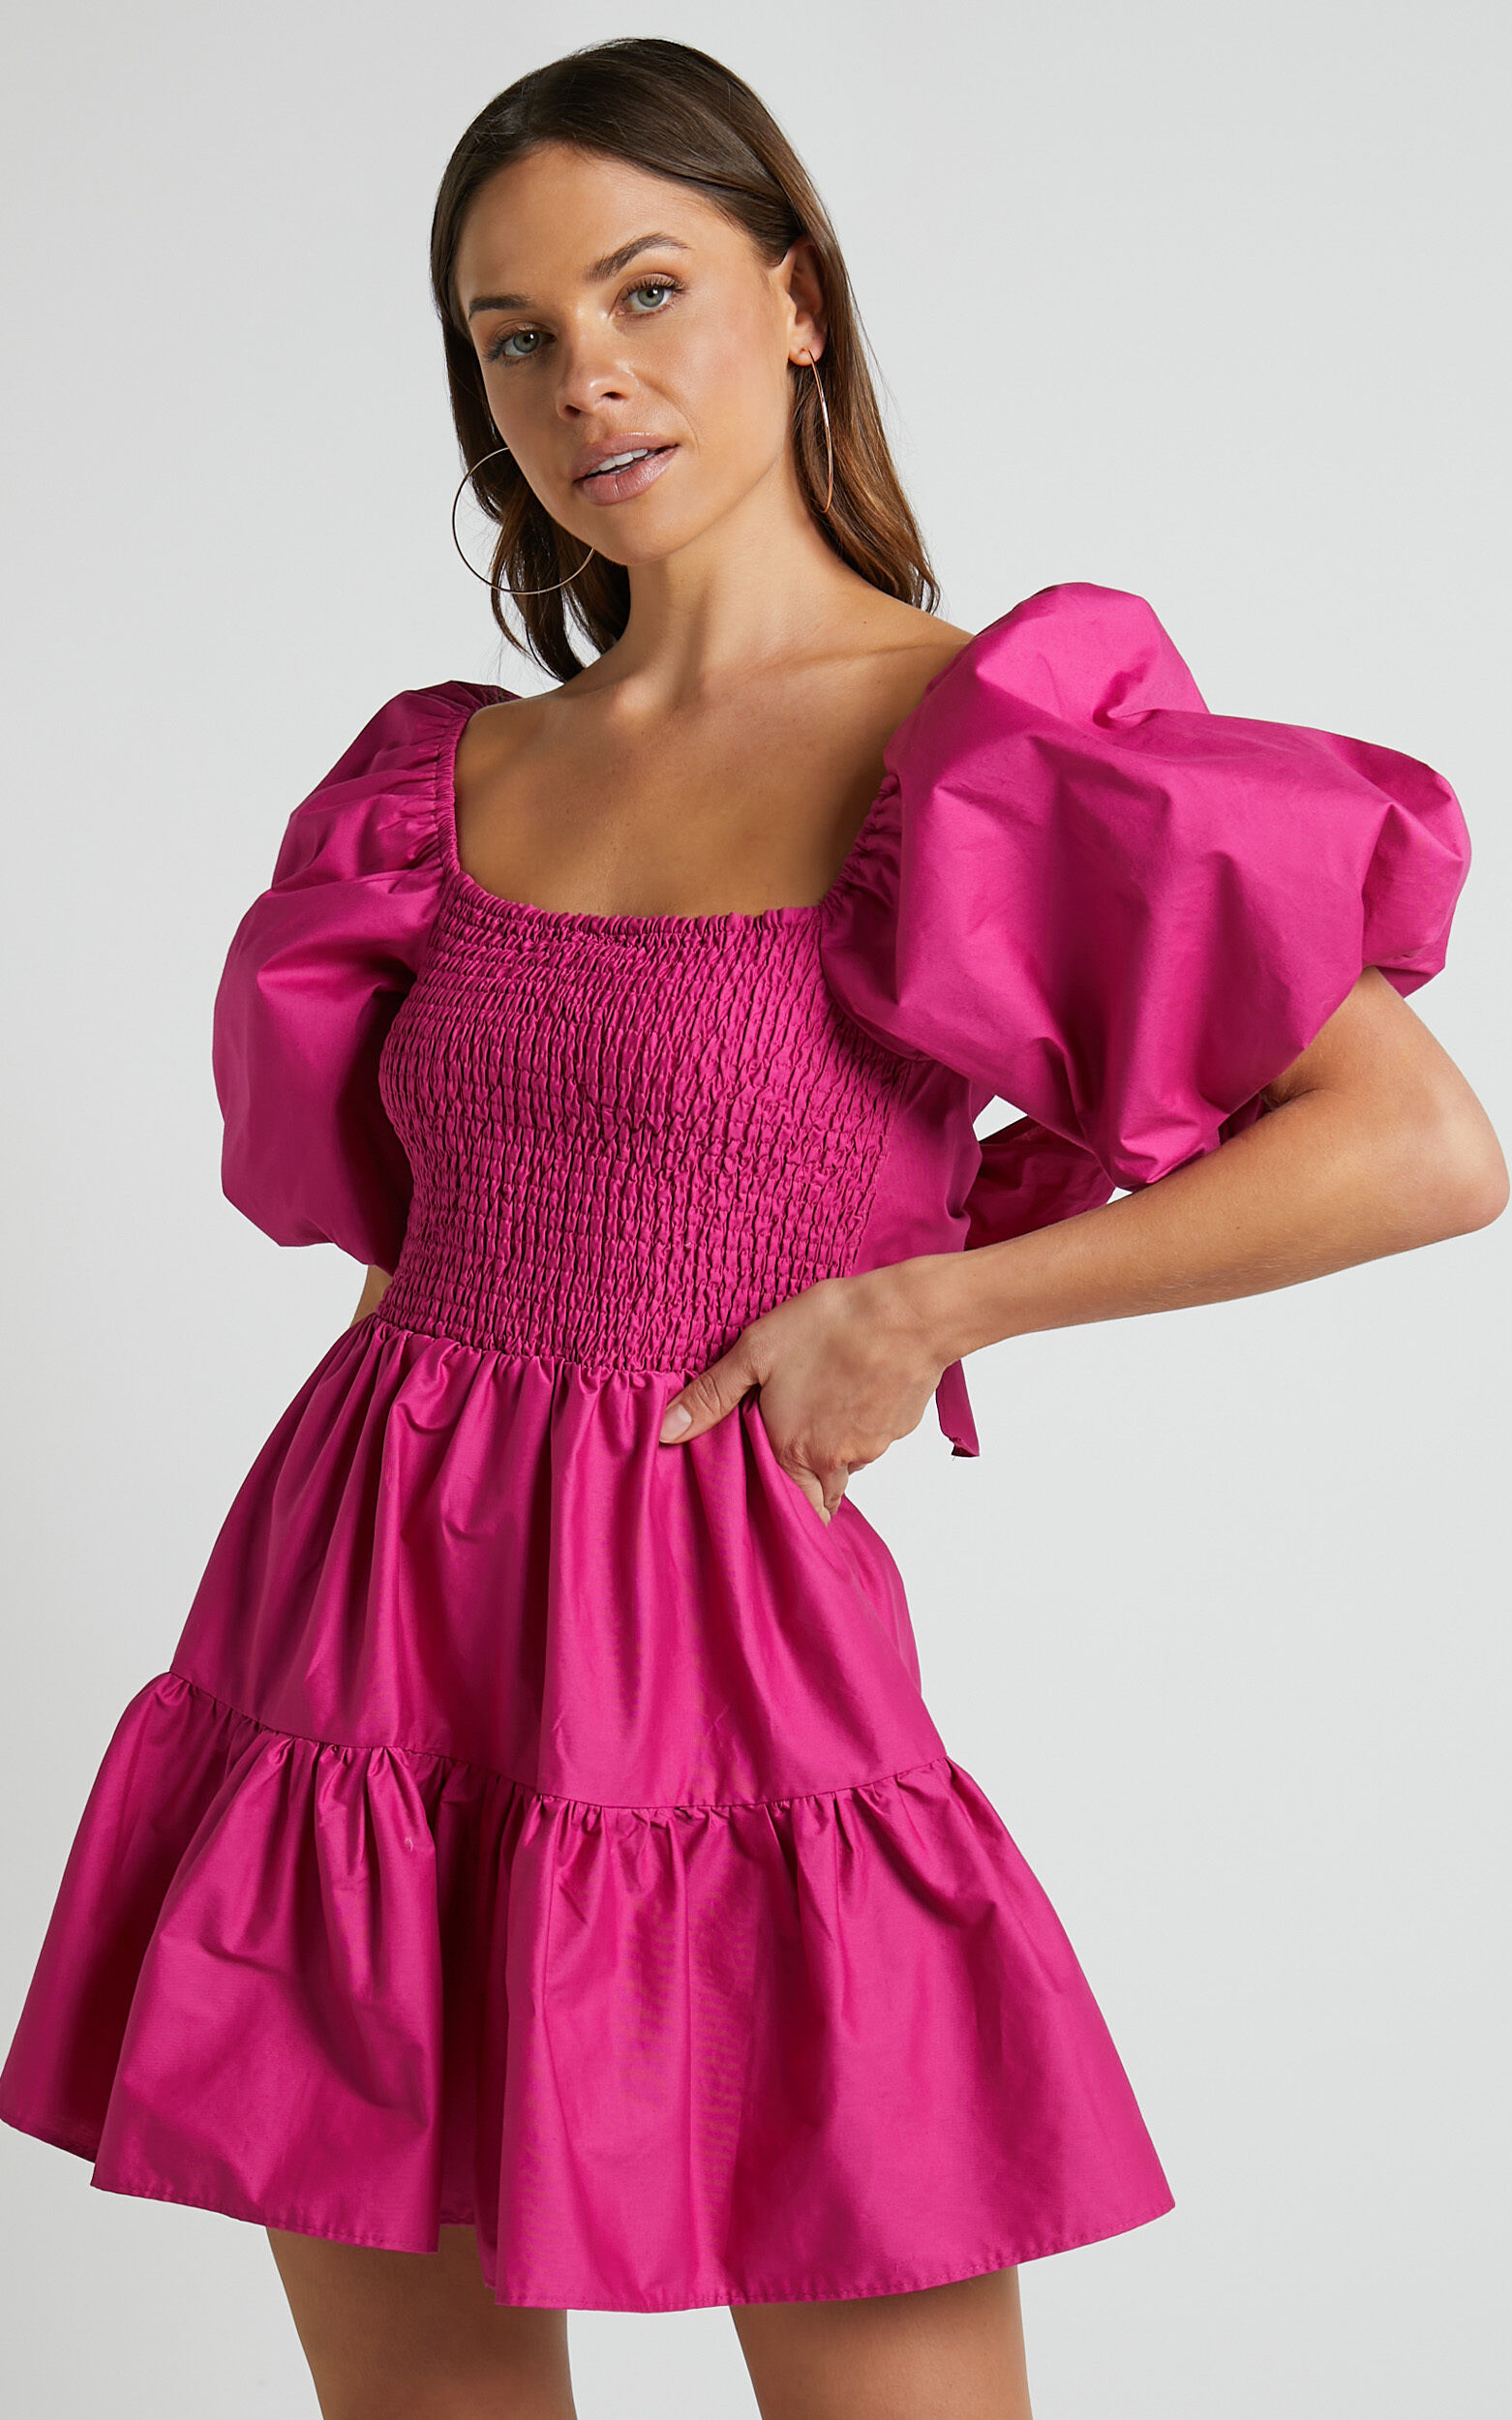 Adanny  Shirred Puff Sleeve Mini Dress in Berry - 06, PNK1, super-hi-res image number null